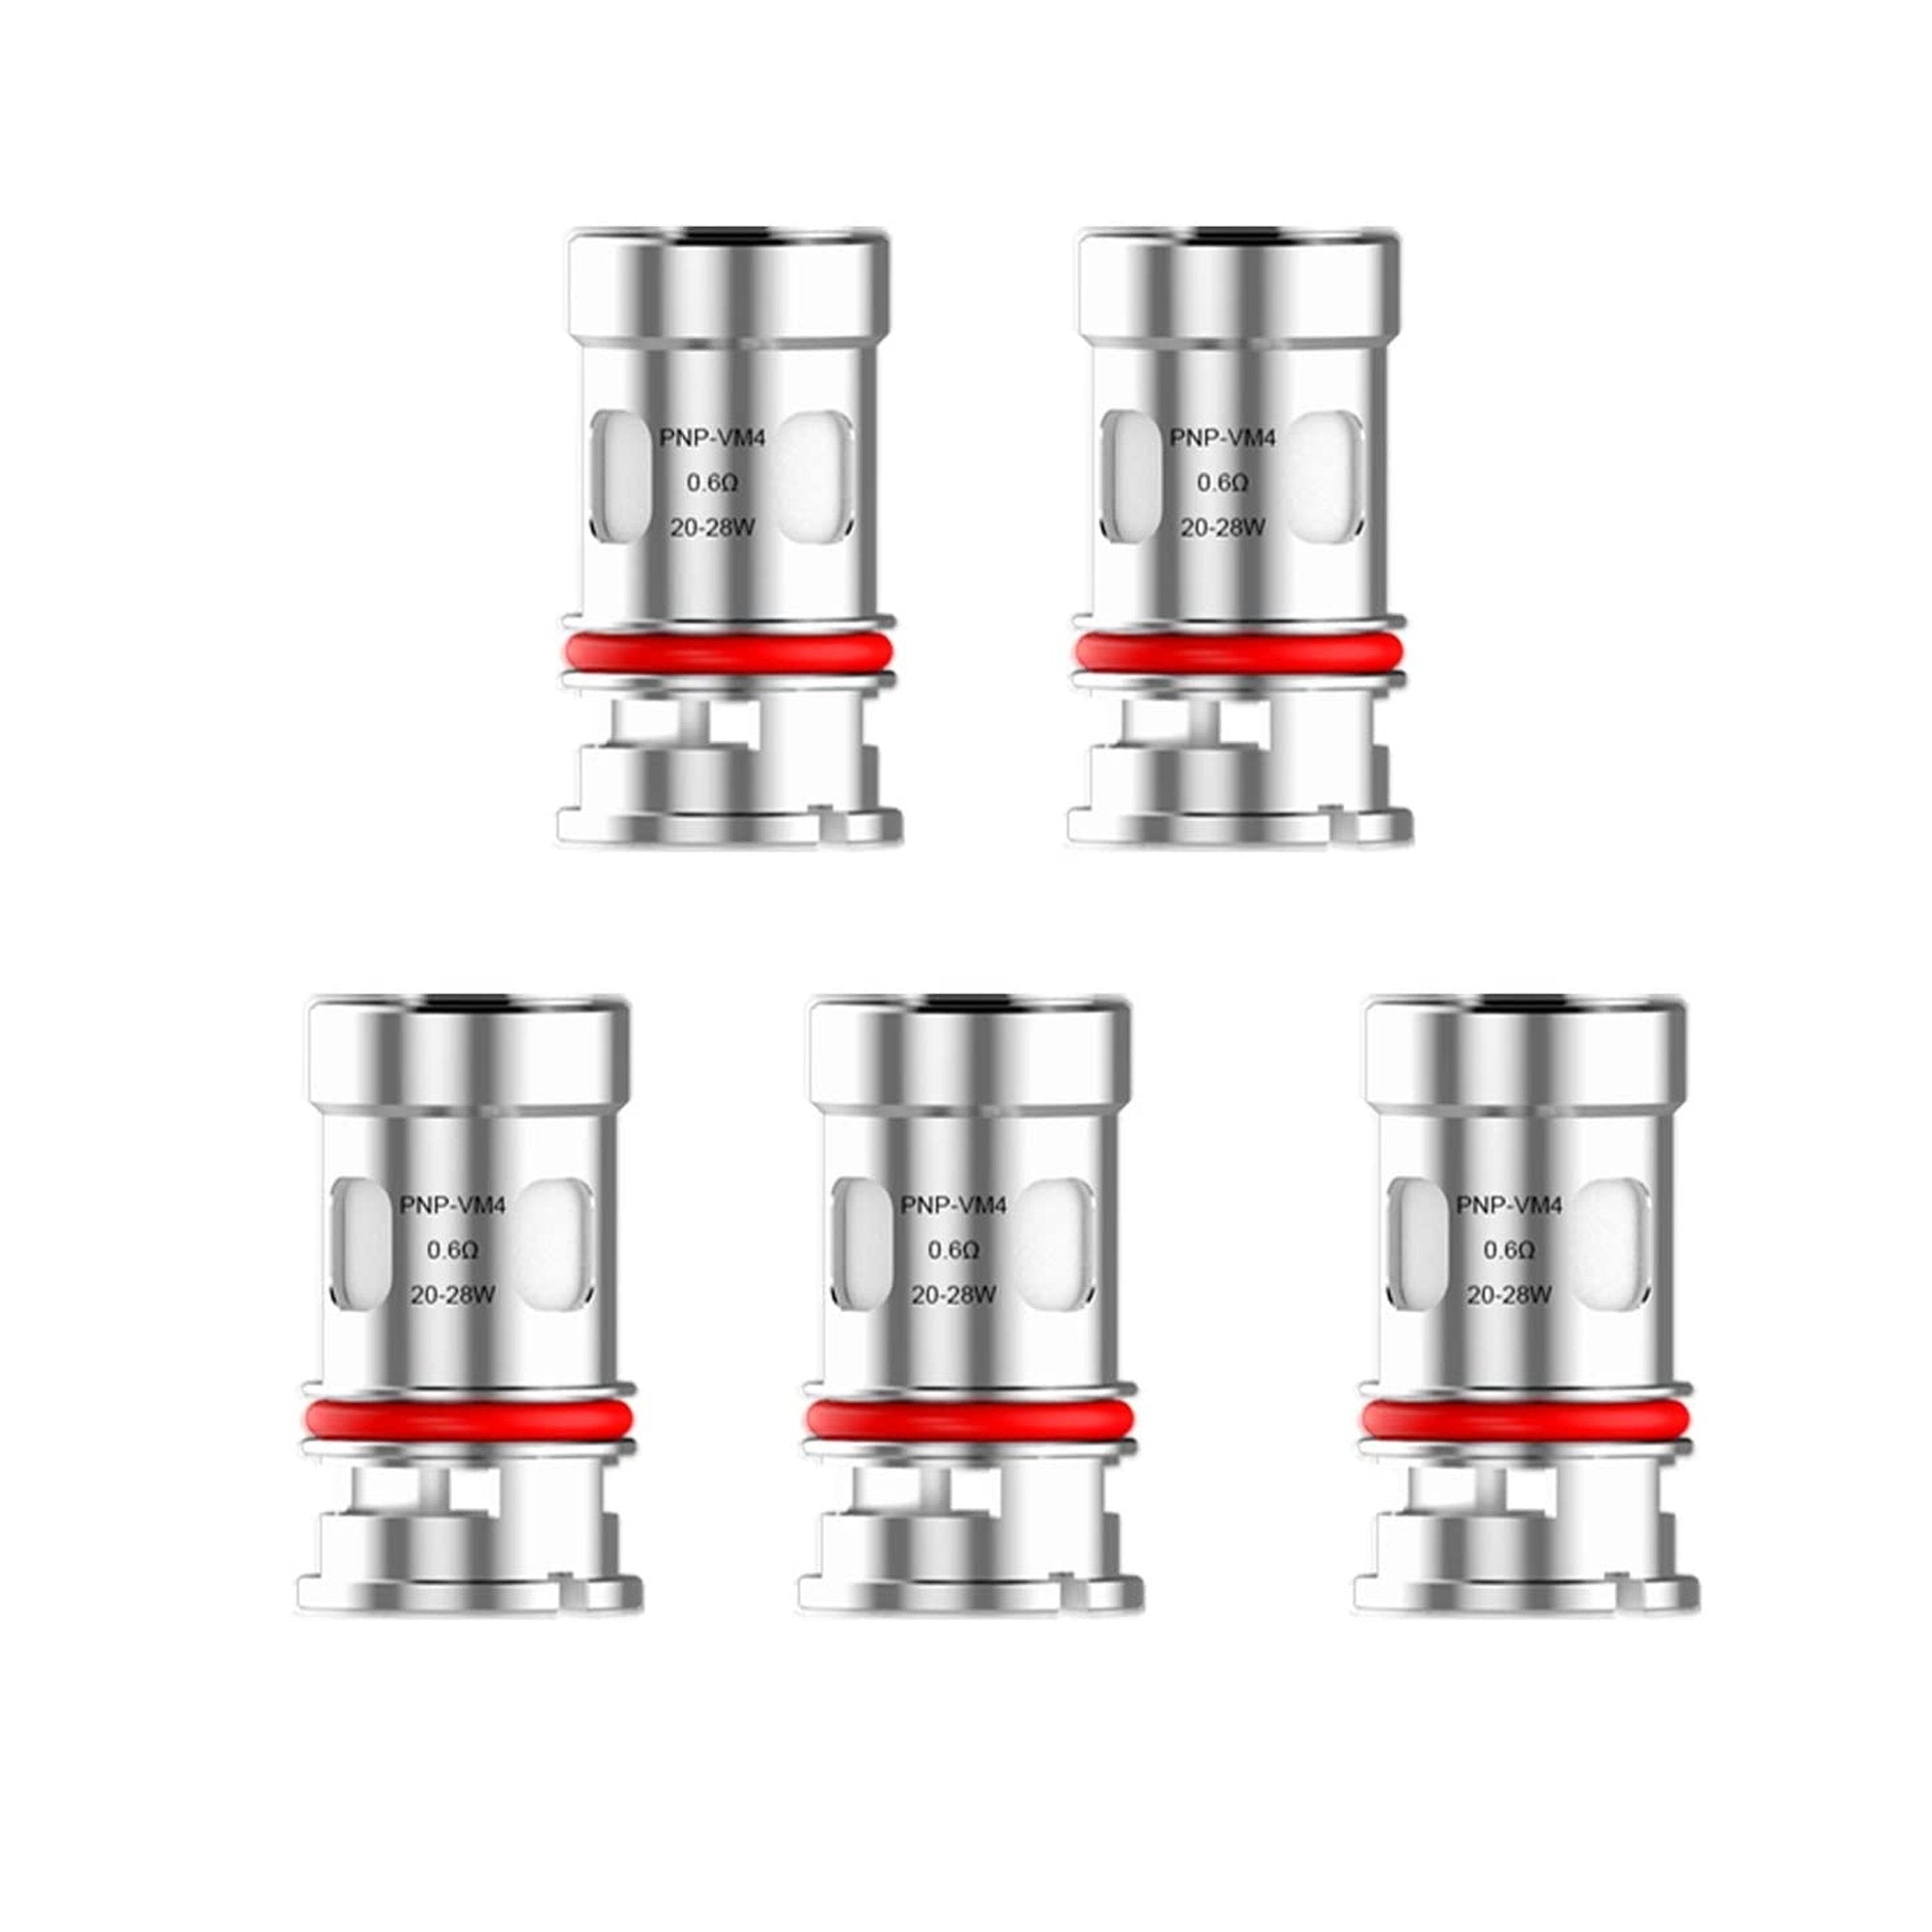 VooPoo PnP Mesh Replacement Coils | 5 Pack | Wolfvapes - Wolfvapes.co.uk-VM4 (0.6 OHM)